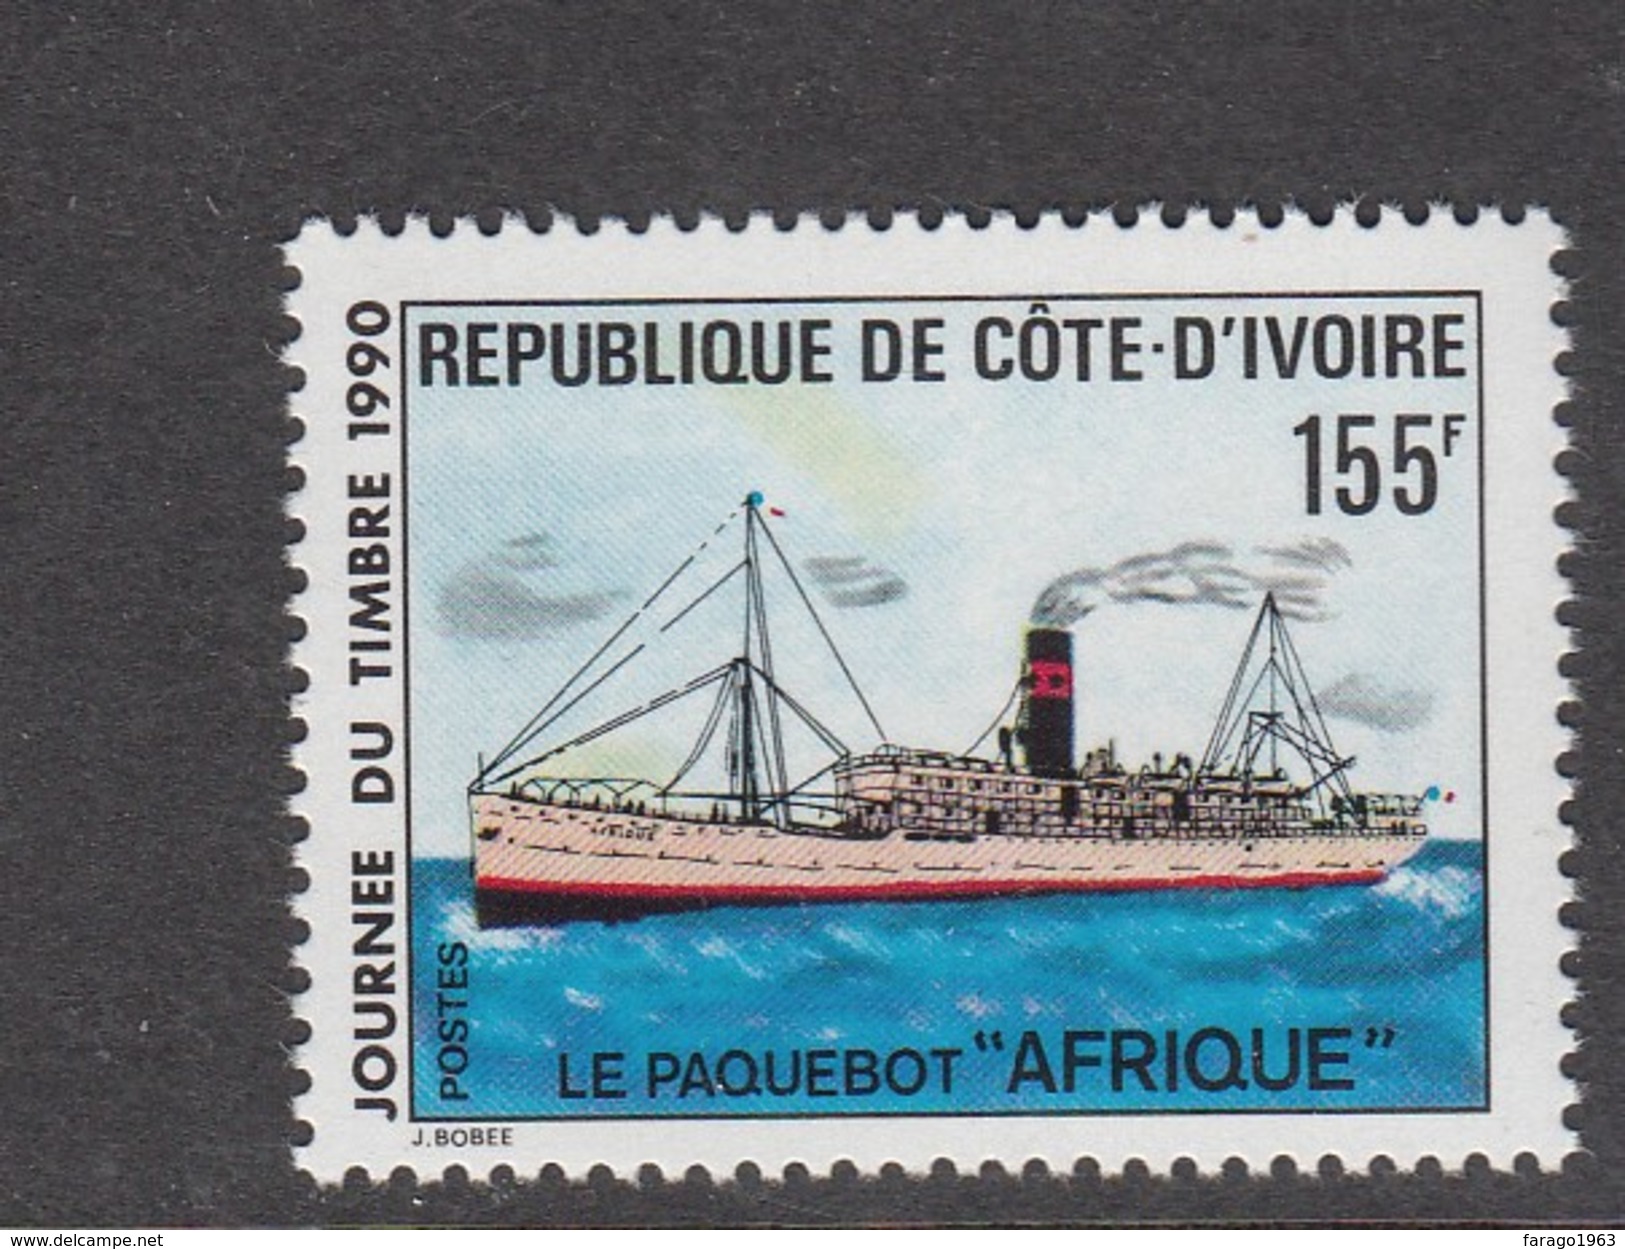 1990 Cote D'Ivoire Ivory Coast Ship Stamp Day  Complete Set Of 4 MNH - Costa De Marfil (1960-...)